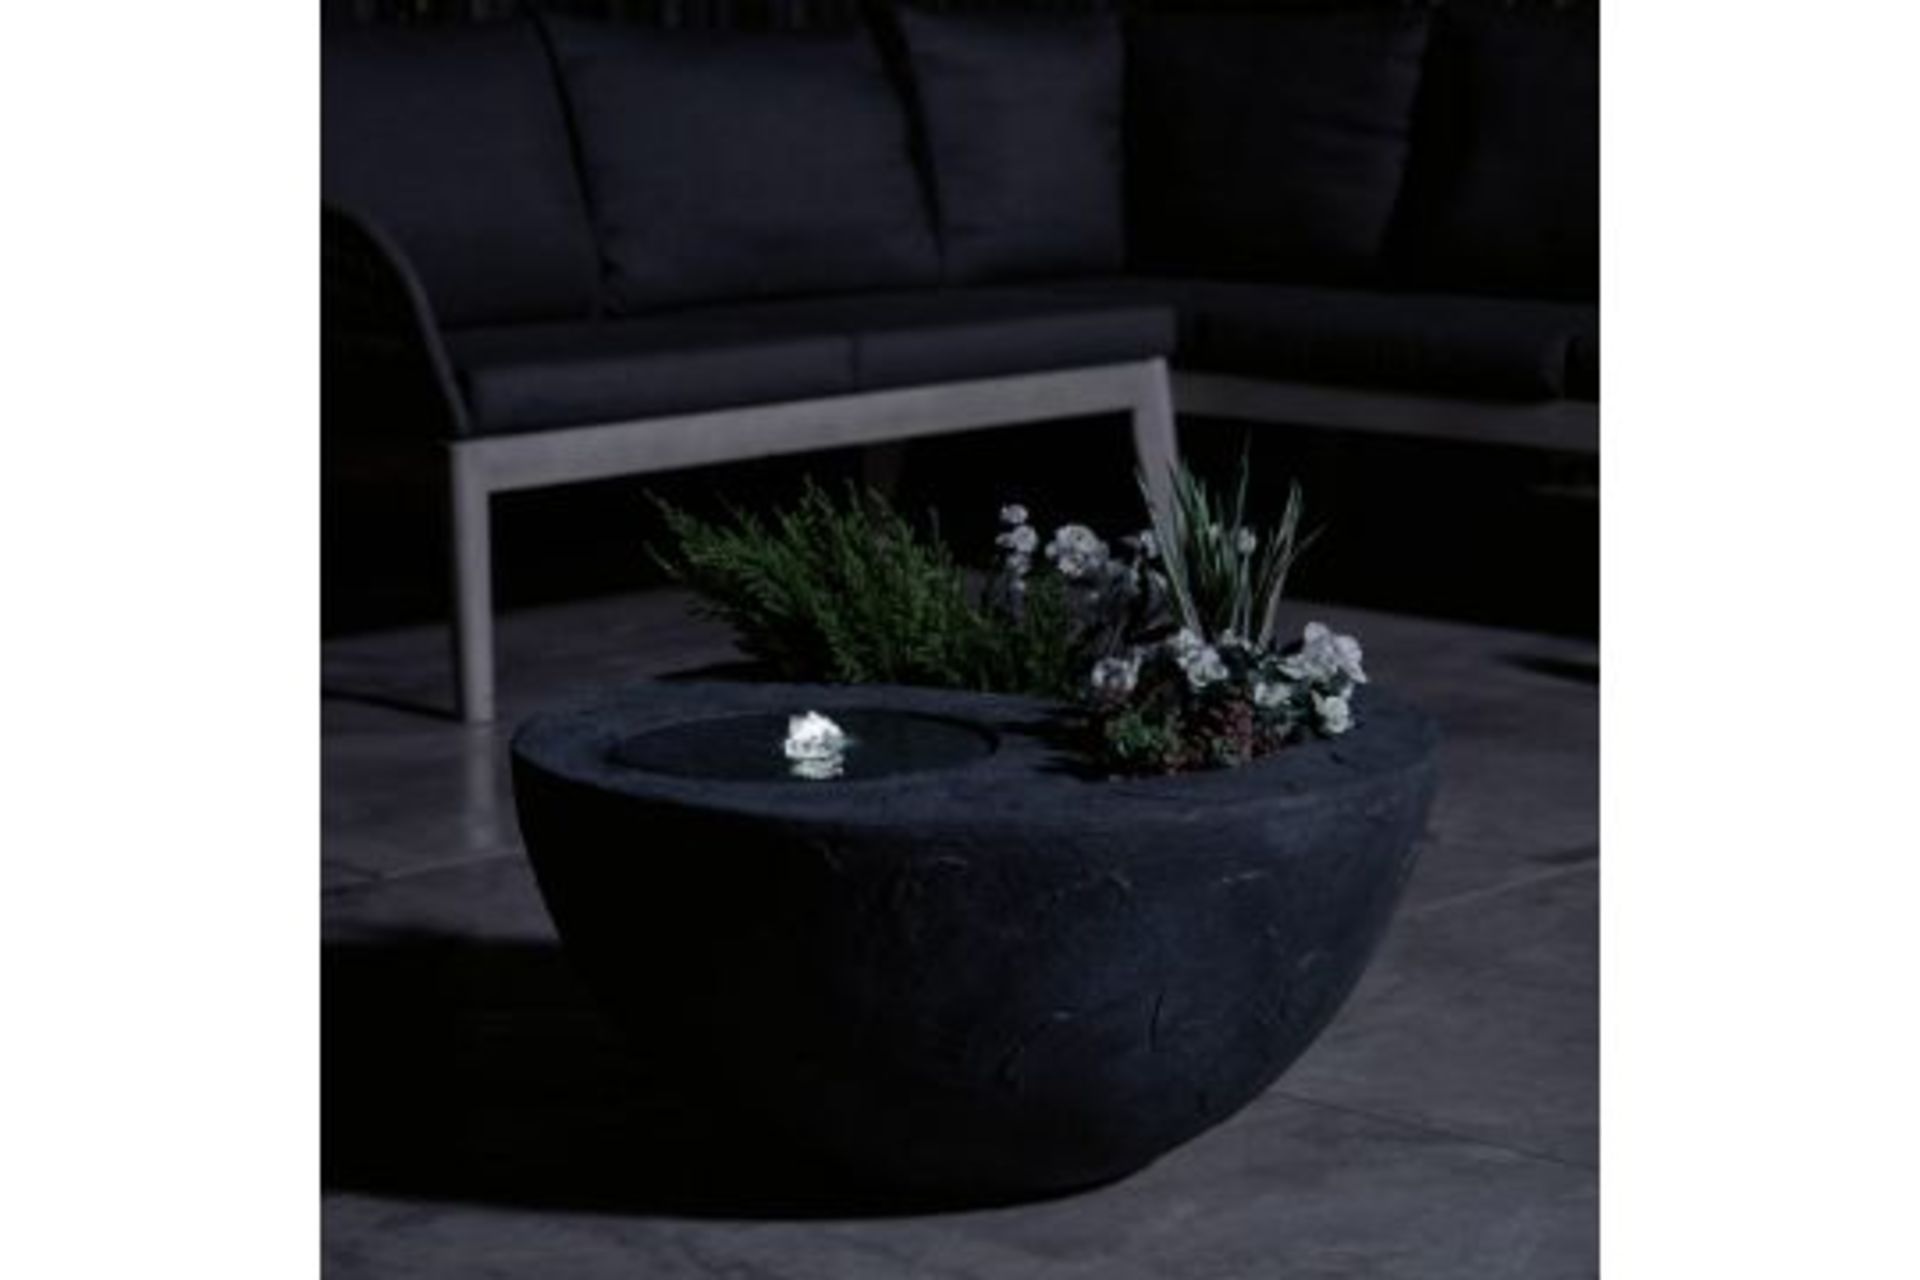 New & Boxed Dual Water Feature and Planter - Garden Bowl Design Planter, Indoor/Outdoor LED Lights - Image 3 of 4